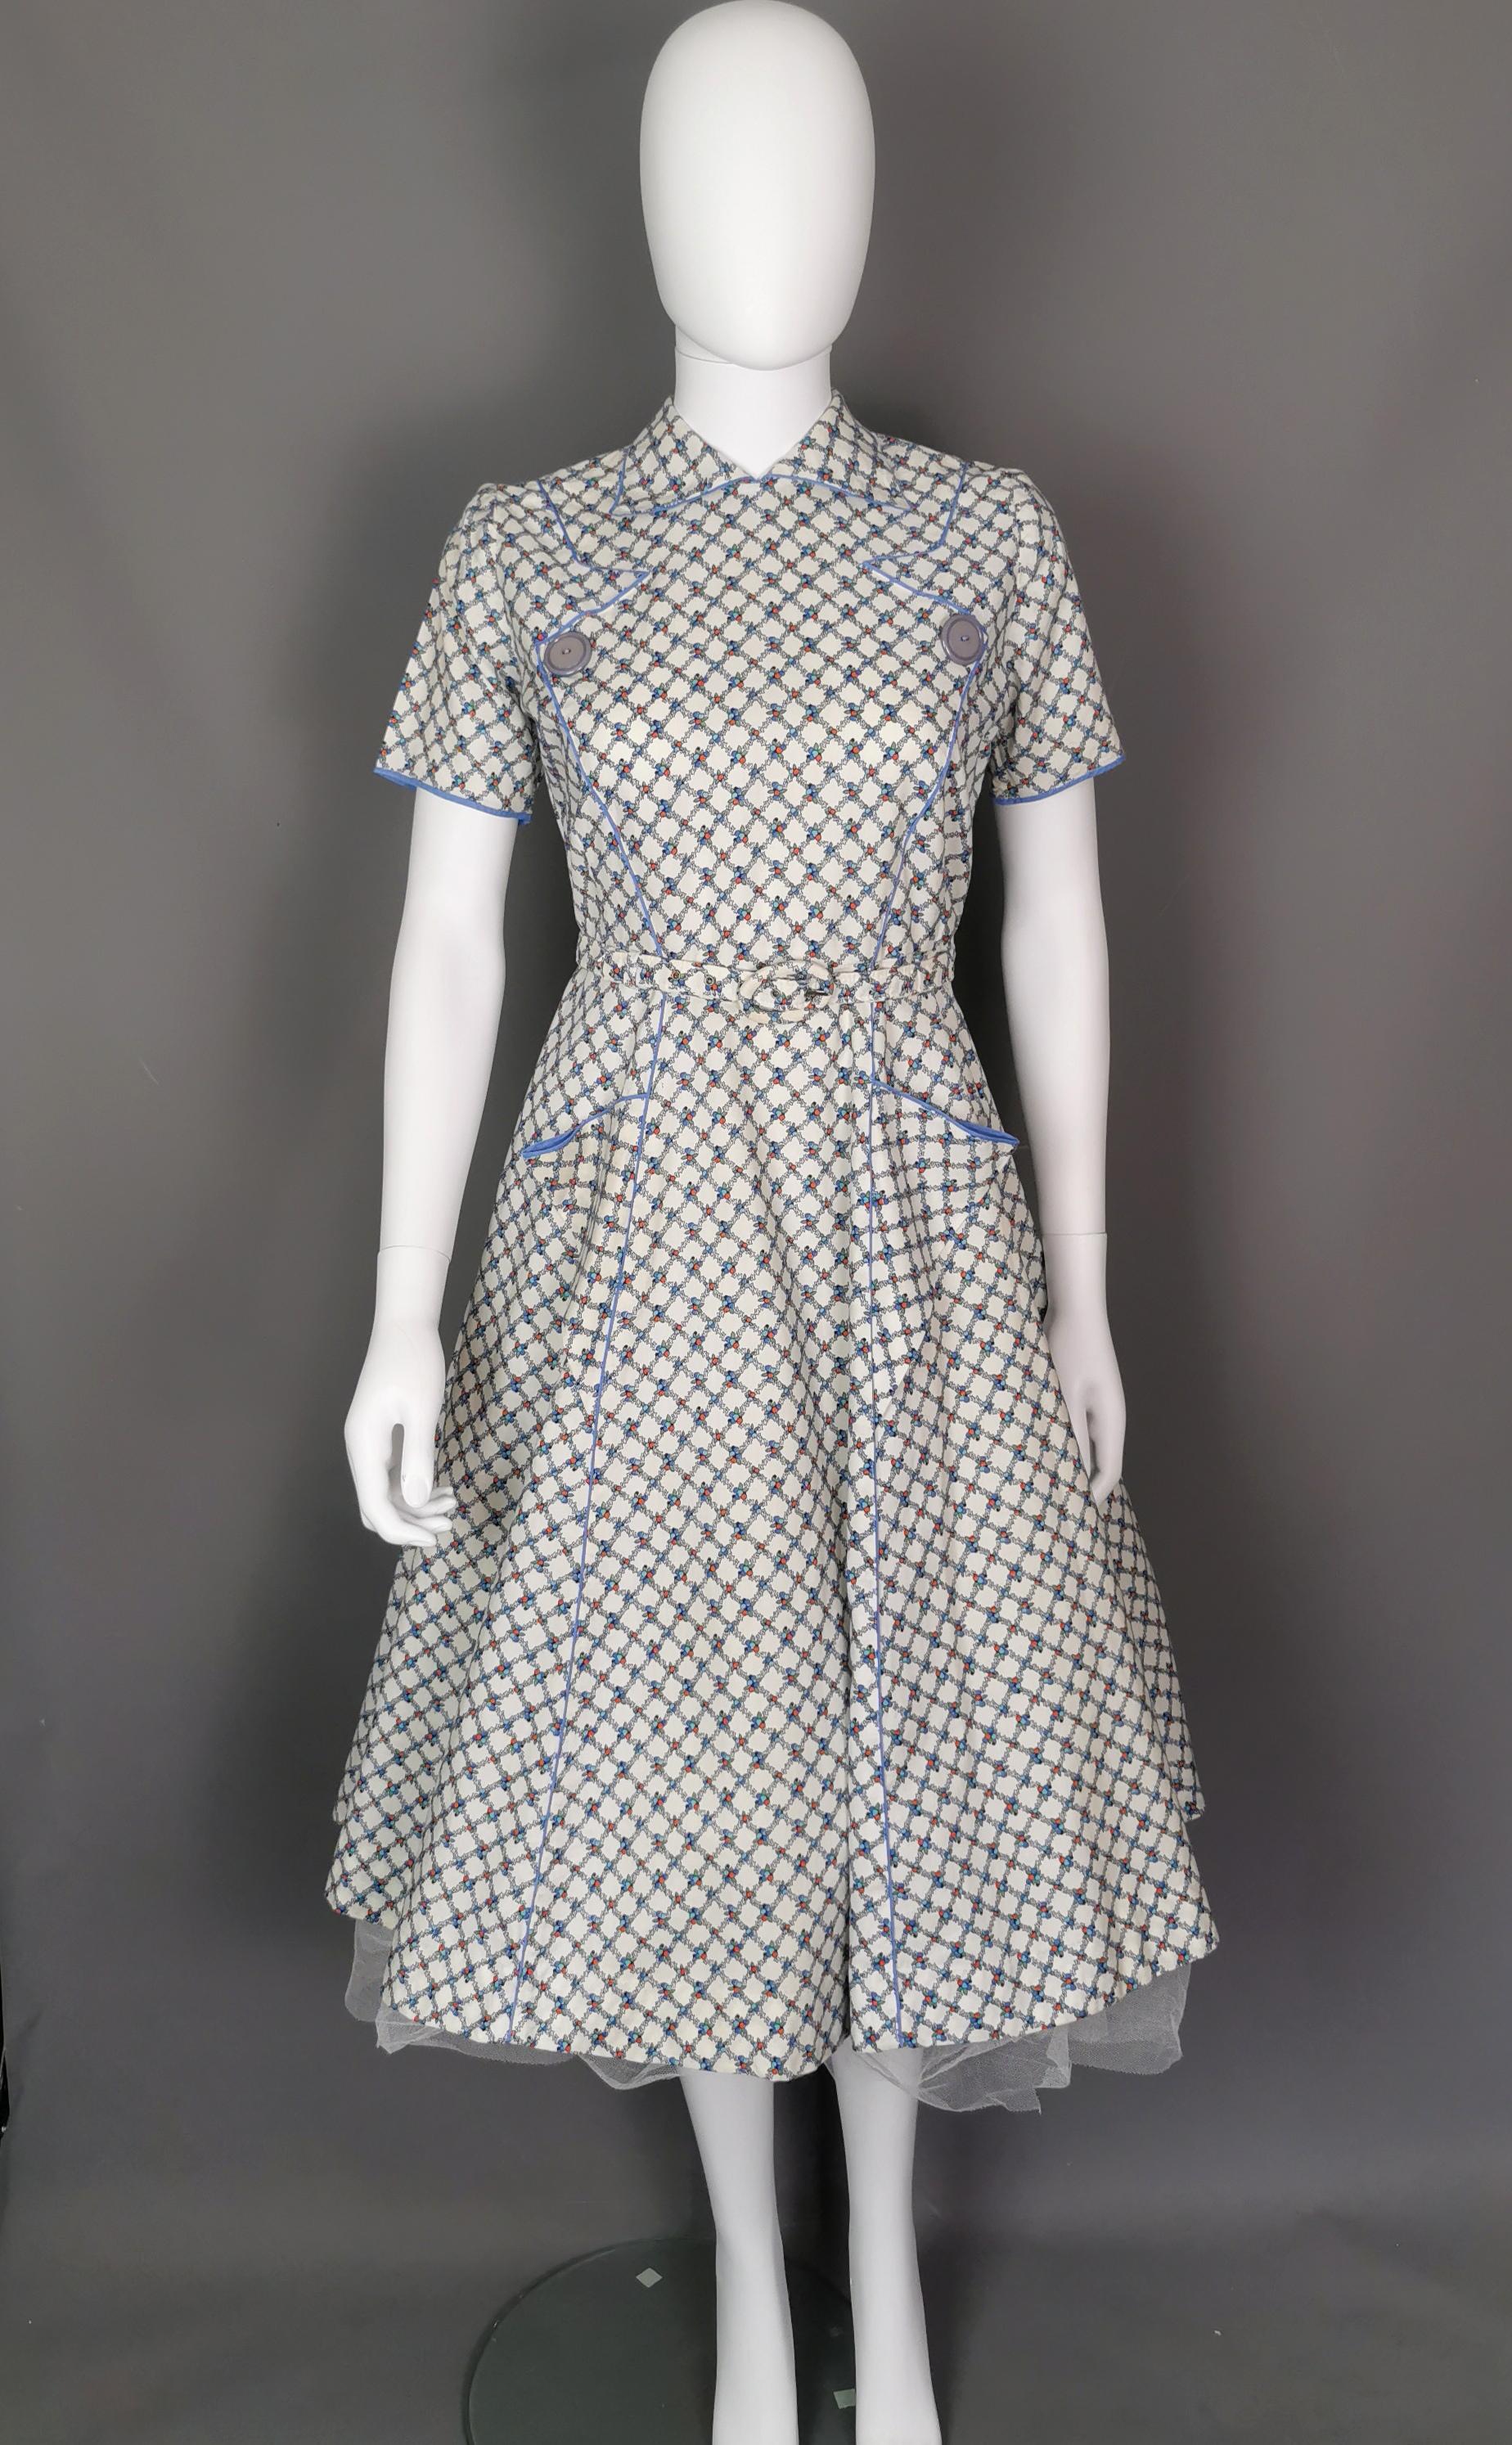 A rare vintage late 1940s pinafore style dress.

This dress gives vintage American diner vibes with it's short pointed collar, pinafore style button detailing and full skirt silhouette.

It is made from soft cotton with an unusual fruit basket